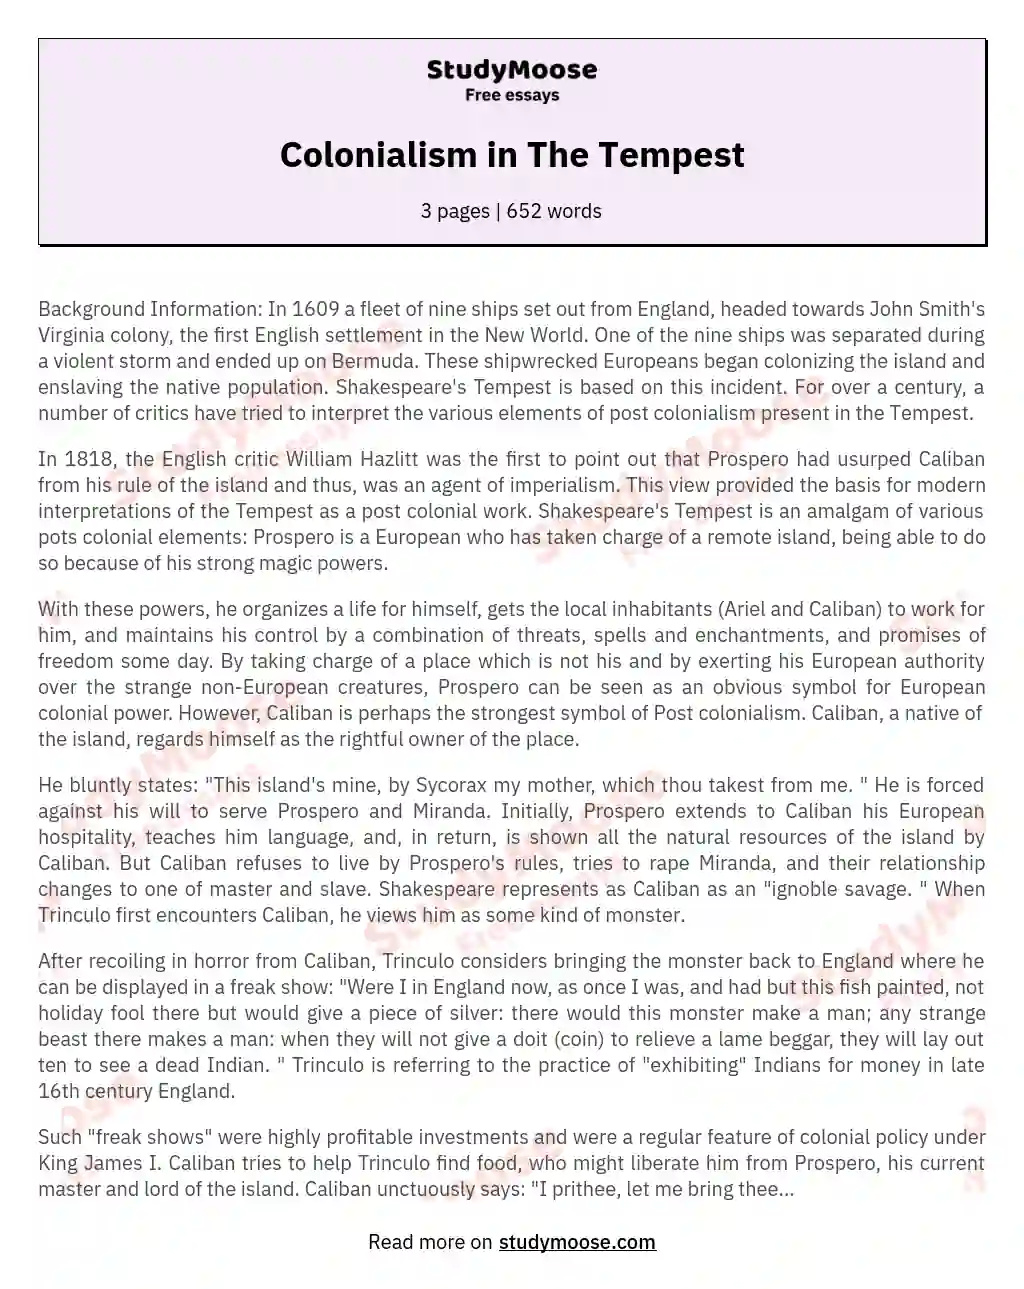 colonialism in the tempest essay